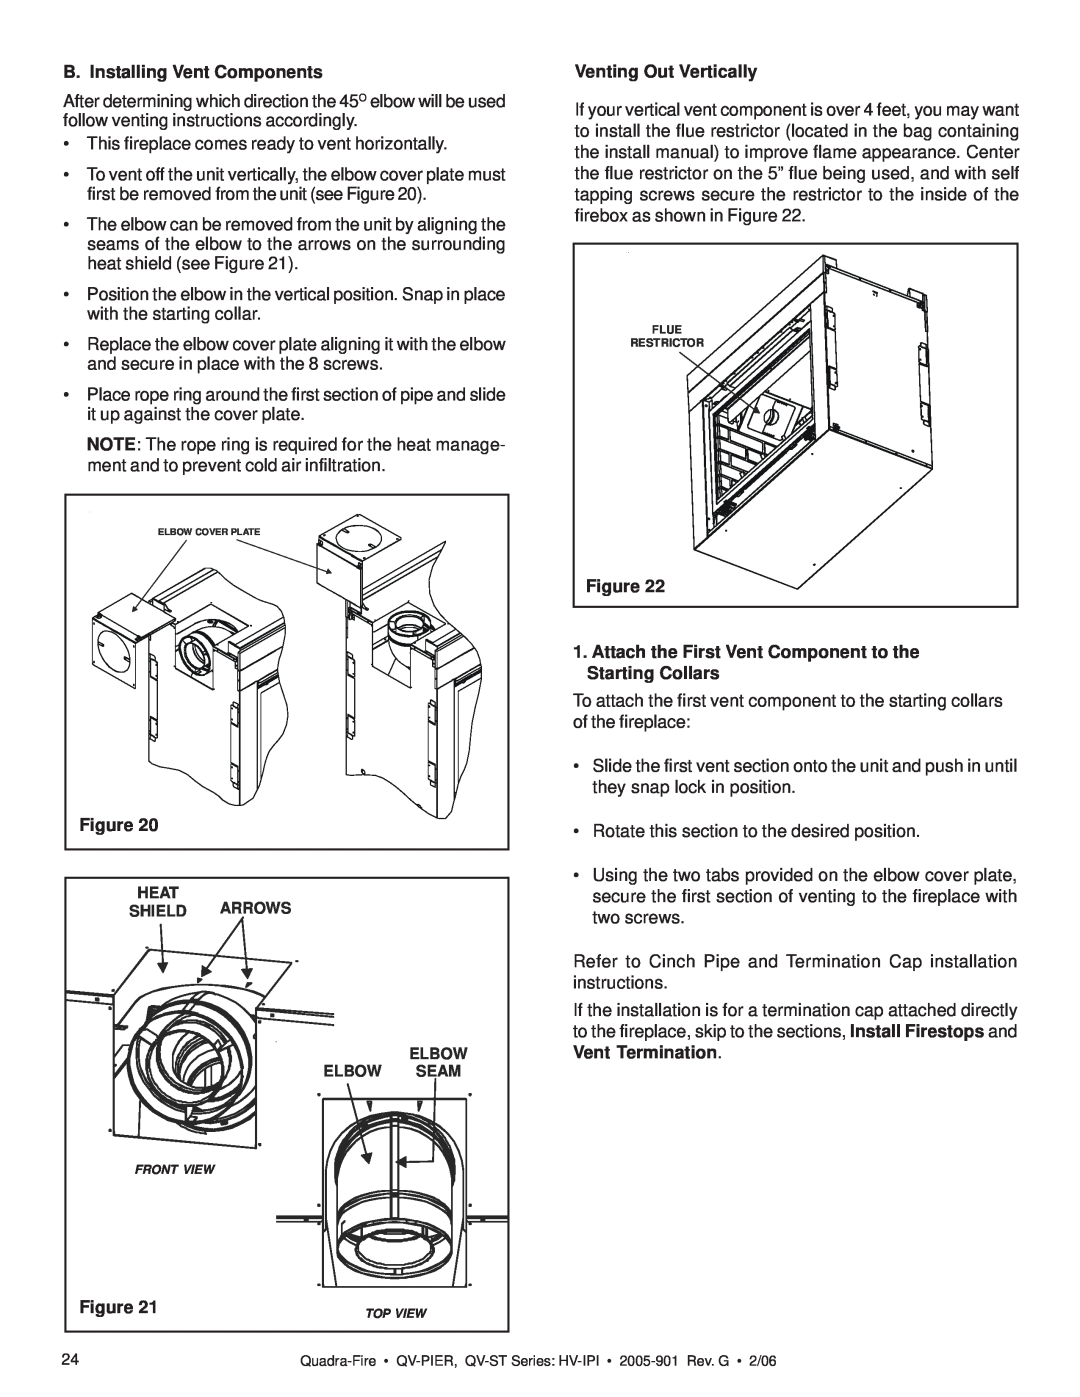 Quadra-Fire QV-PIER, QV-ST owner manual B. Installing Vent Components, Venting Out Vertically 